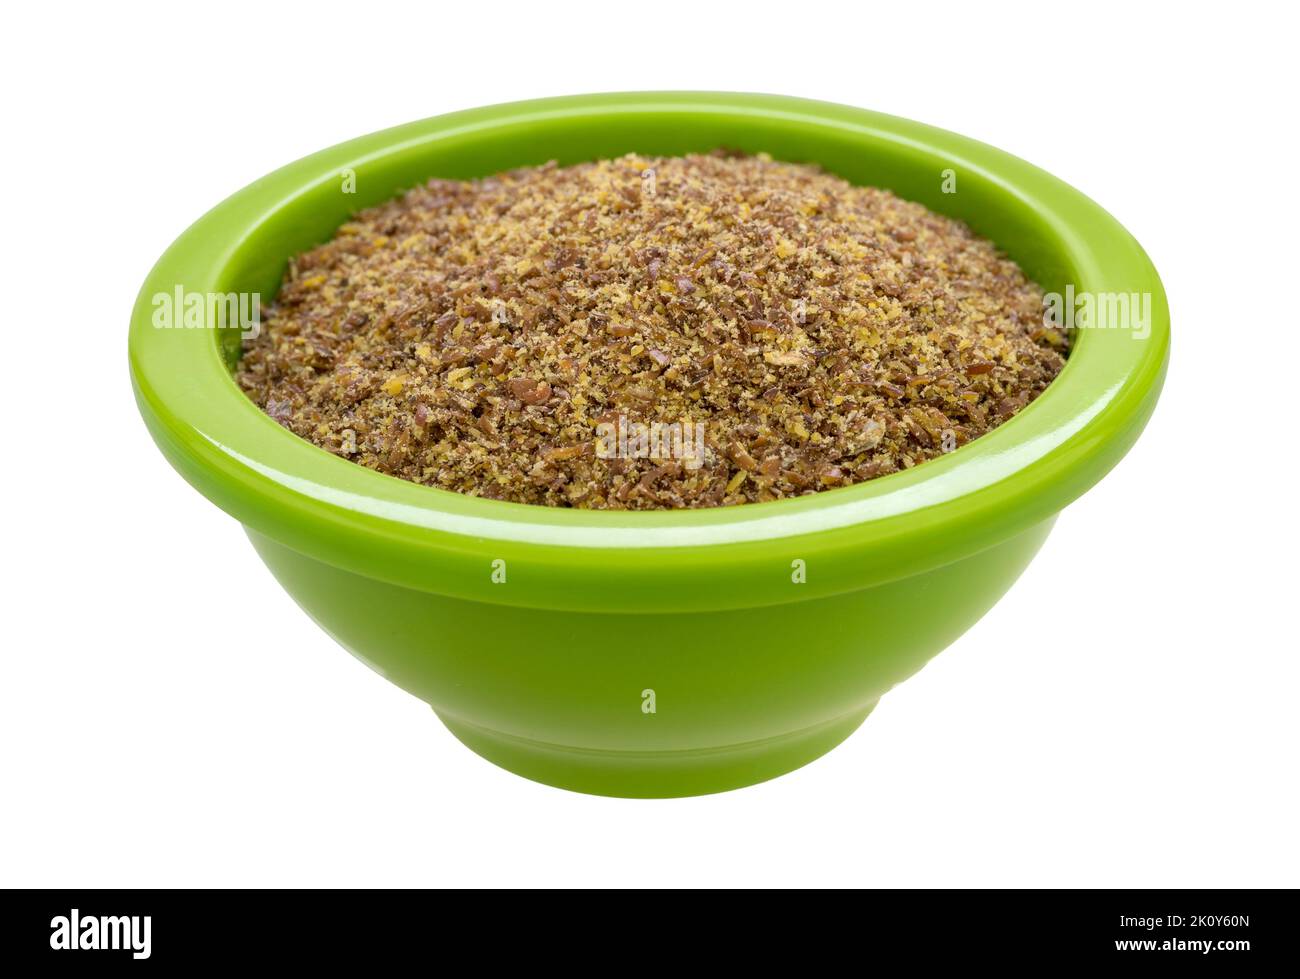 Side view of freshly ground organic flaxseed meal in a green bowl isolated on a white background. Stock Photo